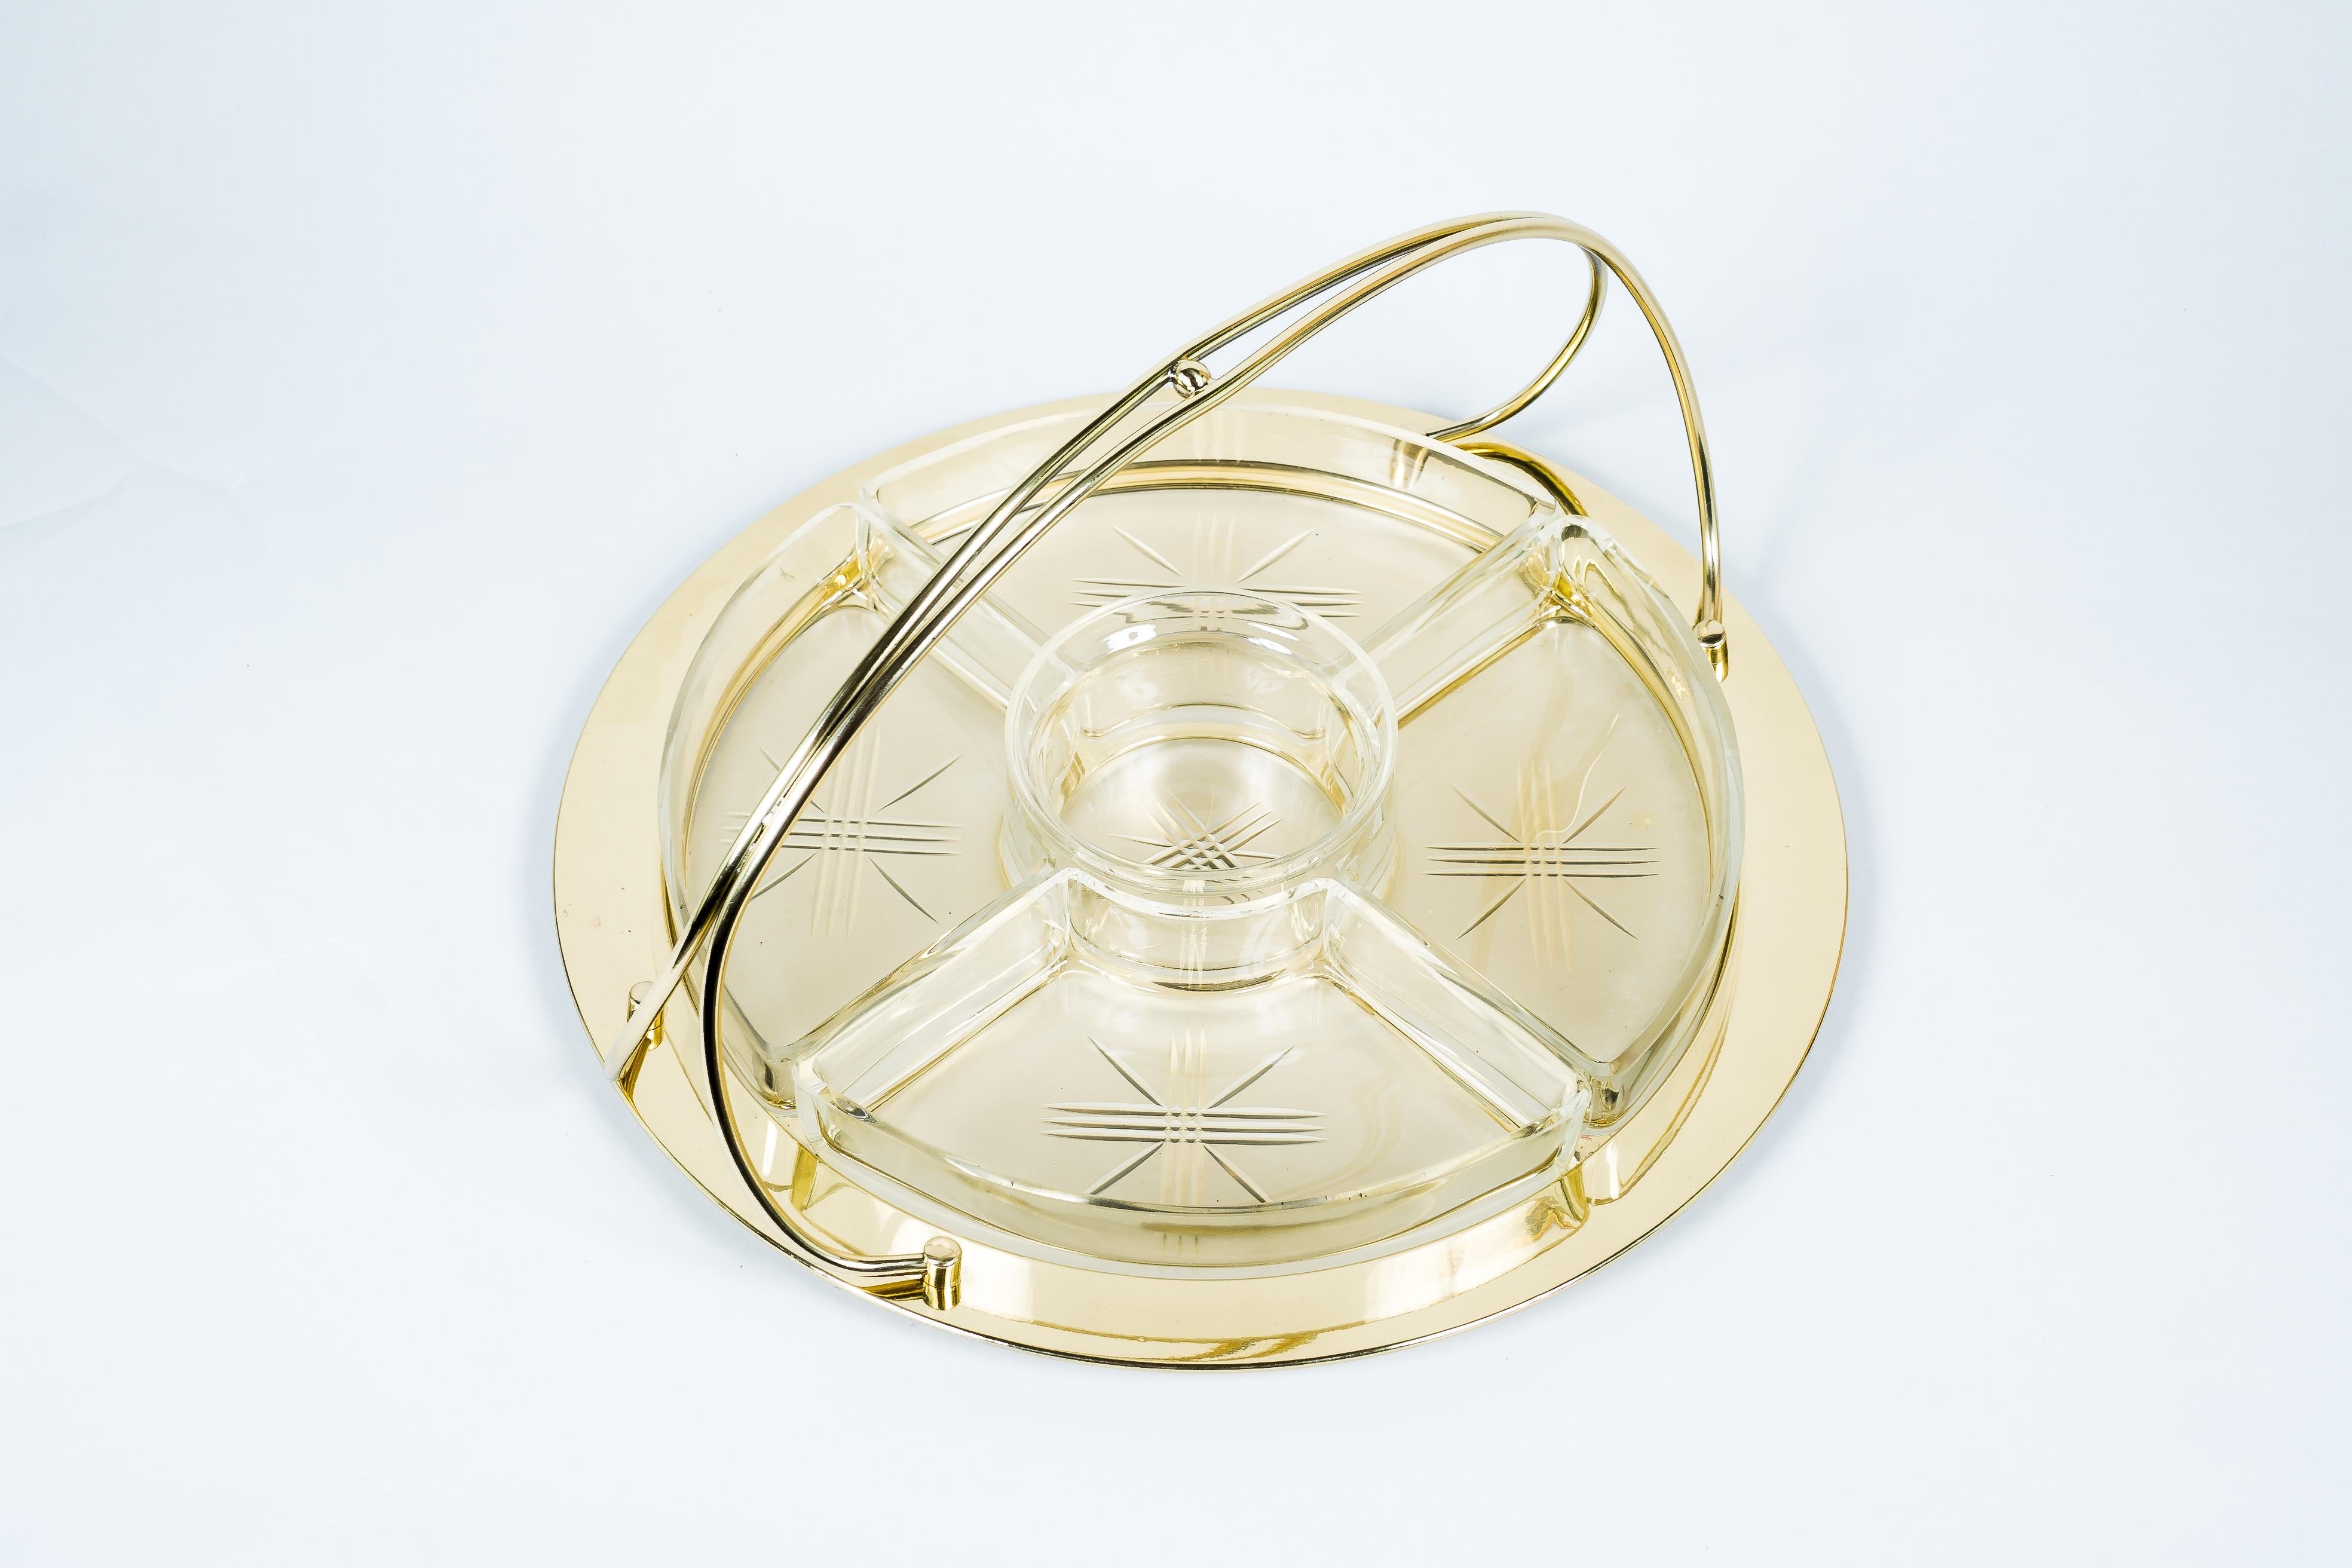 Art Deco centerpiece cut glass and brass execution around 1920s
Brass polished and stove enameled.